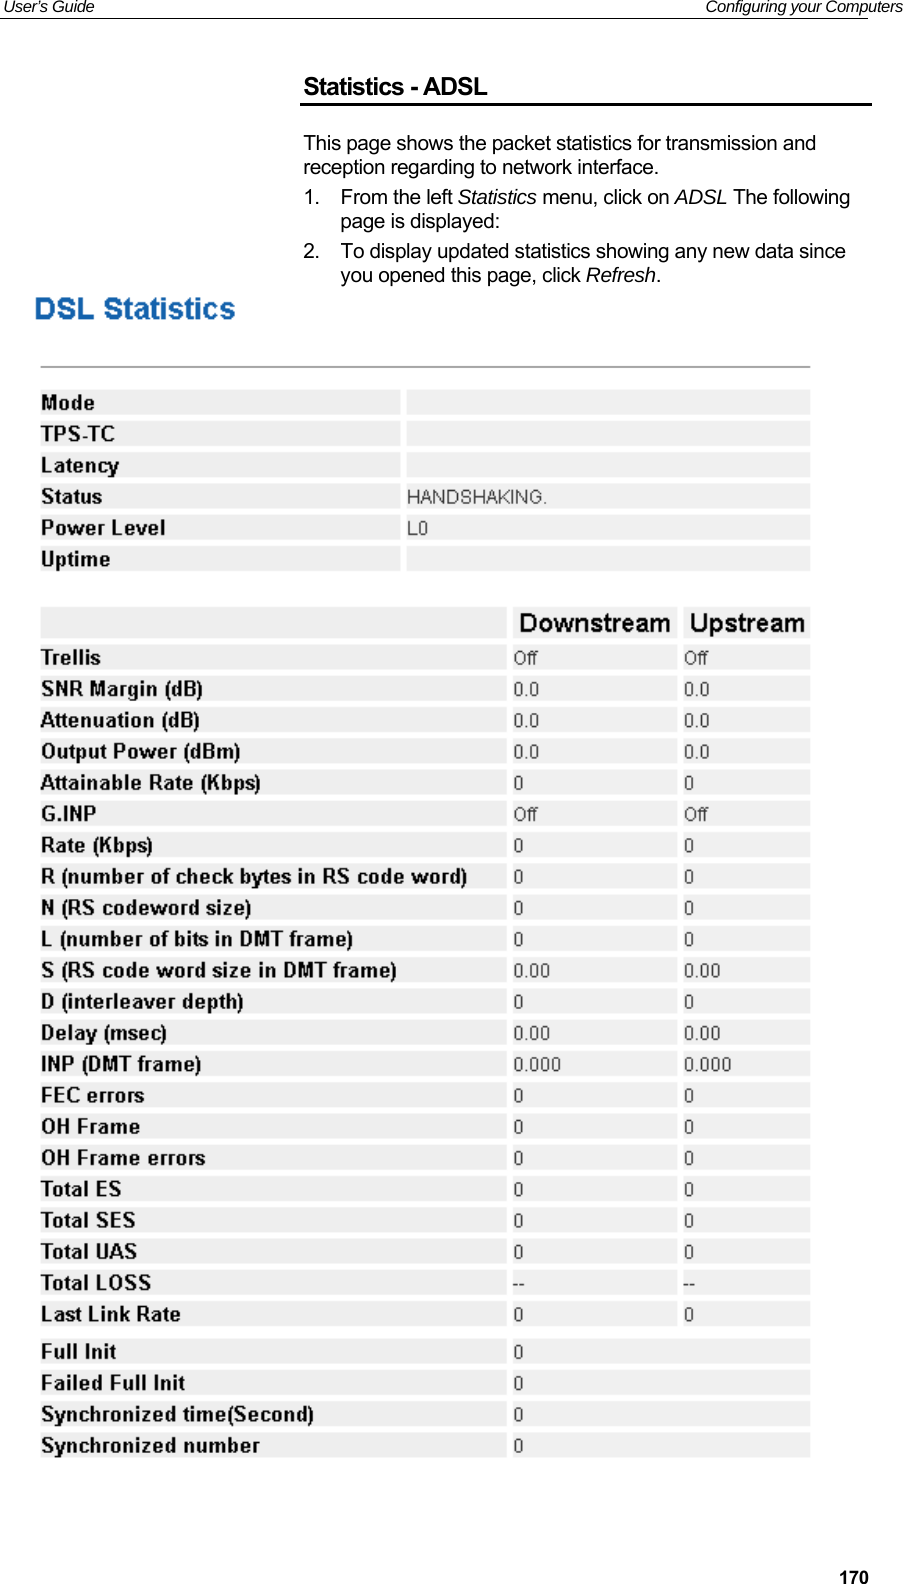 User’s Guide   Configuring your Computers  170Statistics - ADSL This page shows the packet statistics for transmission and reception regarding to network interface. 1.  From the left Statistics menu, click on ADSL The following page is displayed: 2.  To display updated statistics showing any new data since you opened this page, click Refresh.   